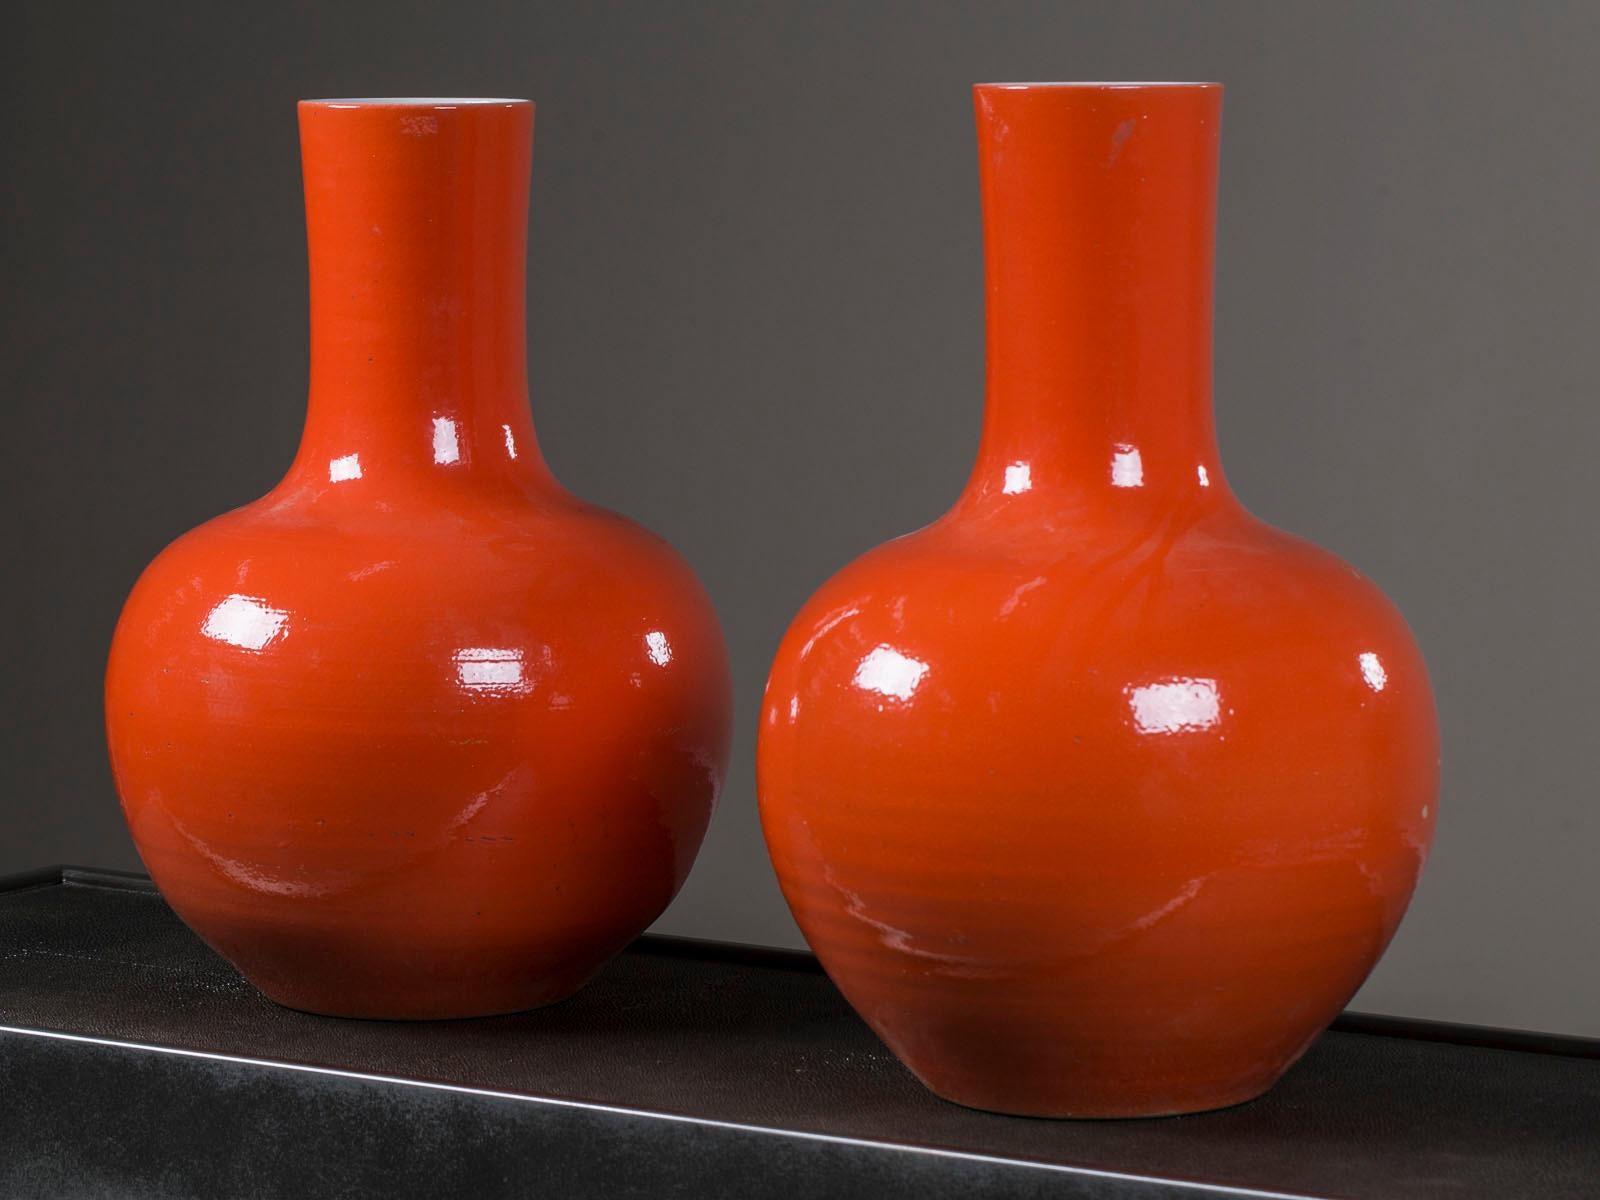 A pair of enormous modern Chinese ceramic vases glazed in an intense persimmon color made entirely by hand in China. The fantastic large-scale of this pair of Chinese vases is impressive as is the hand applied glaze with its dimpled texture. Please